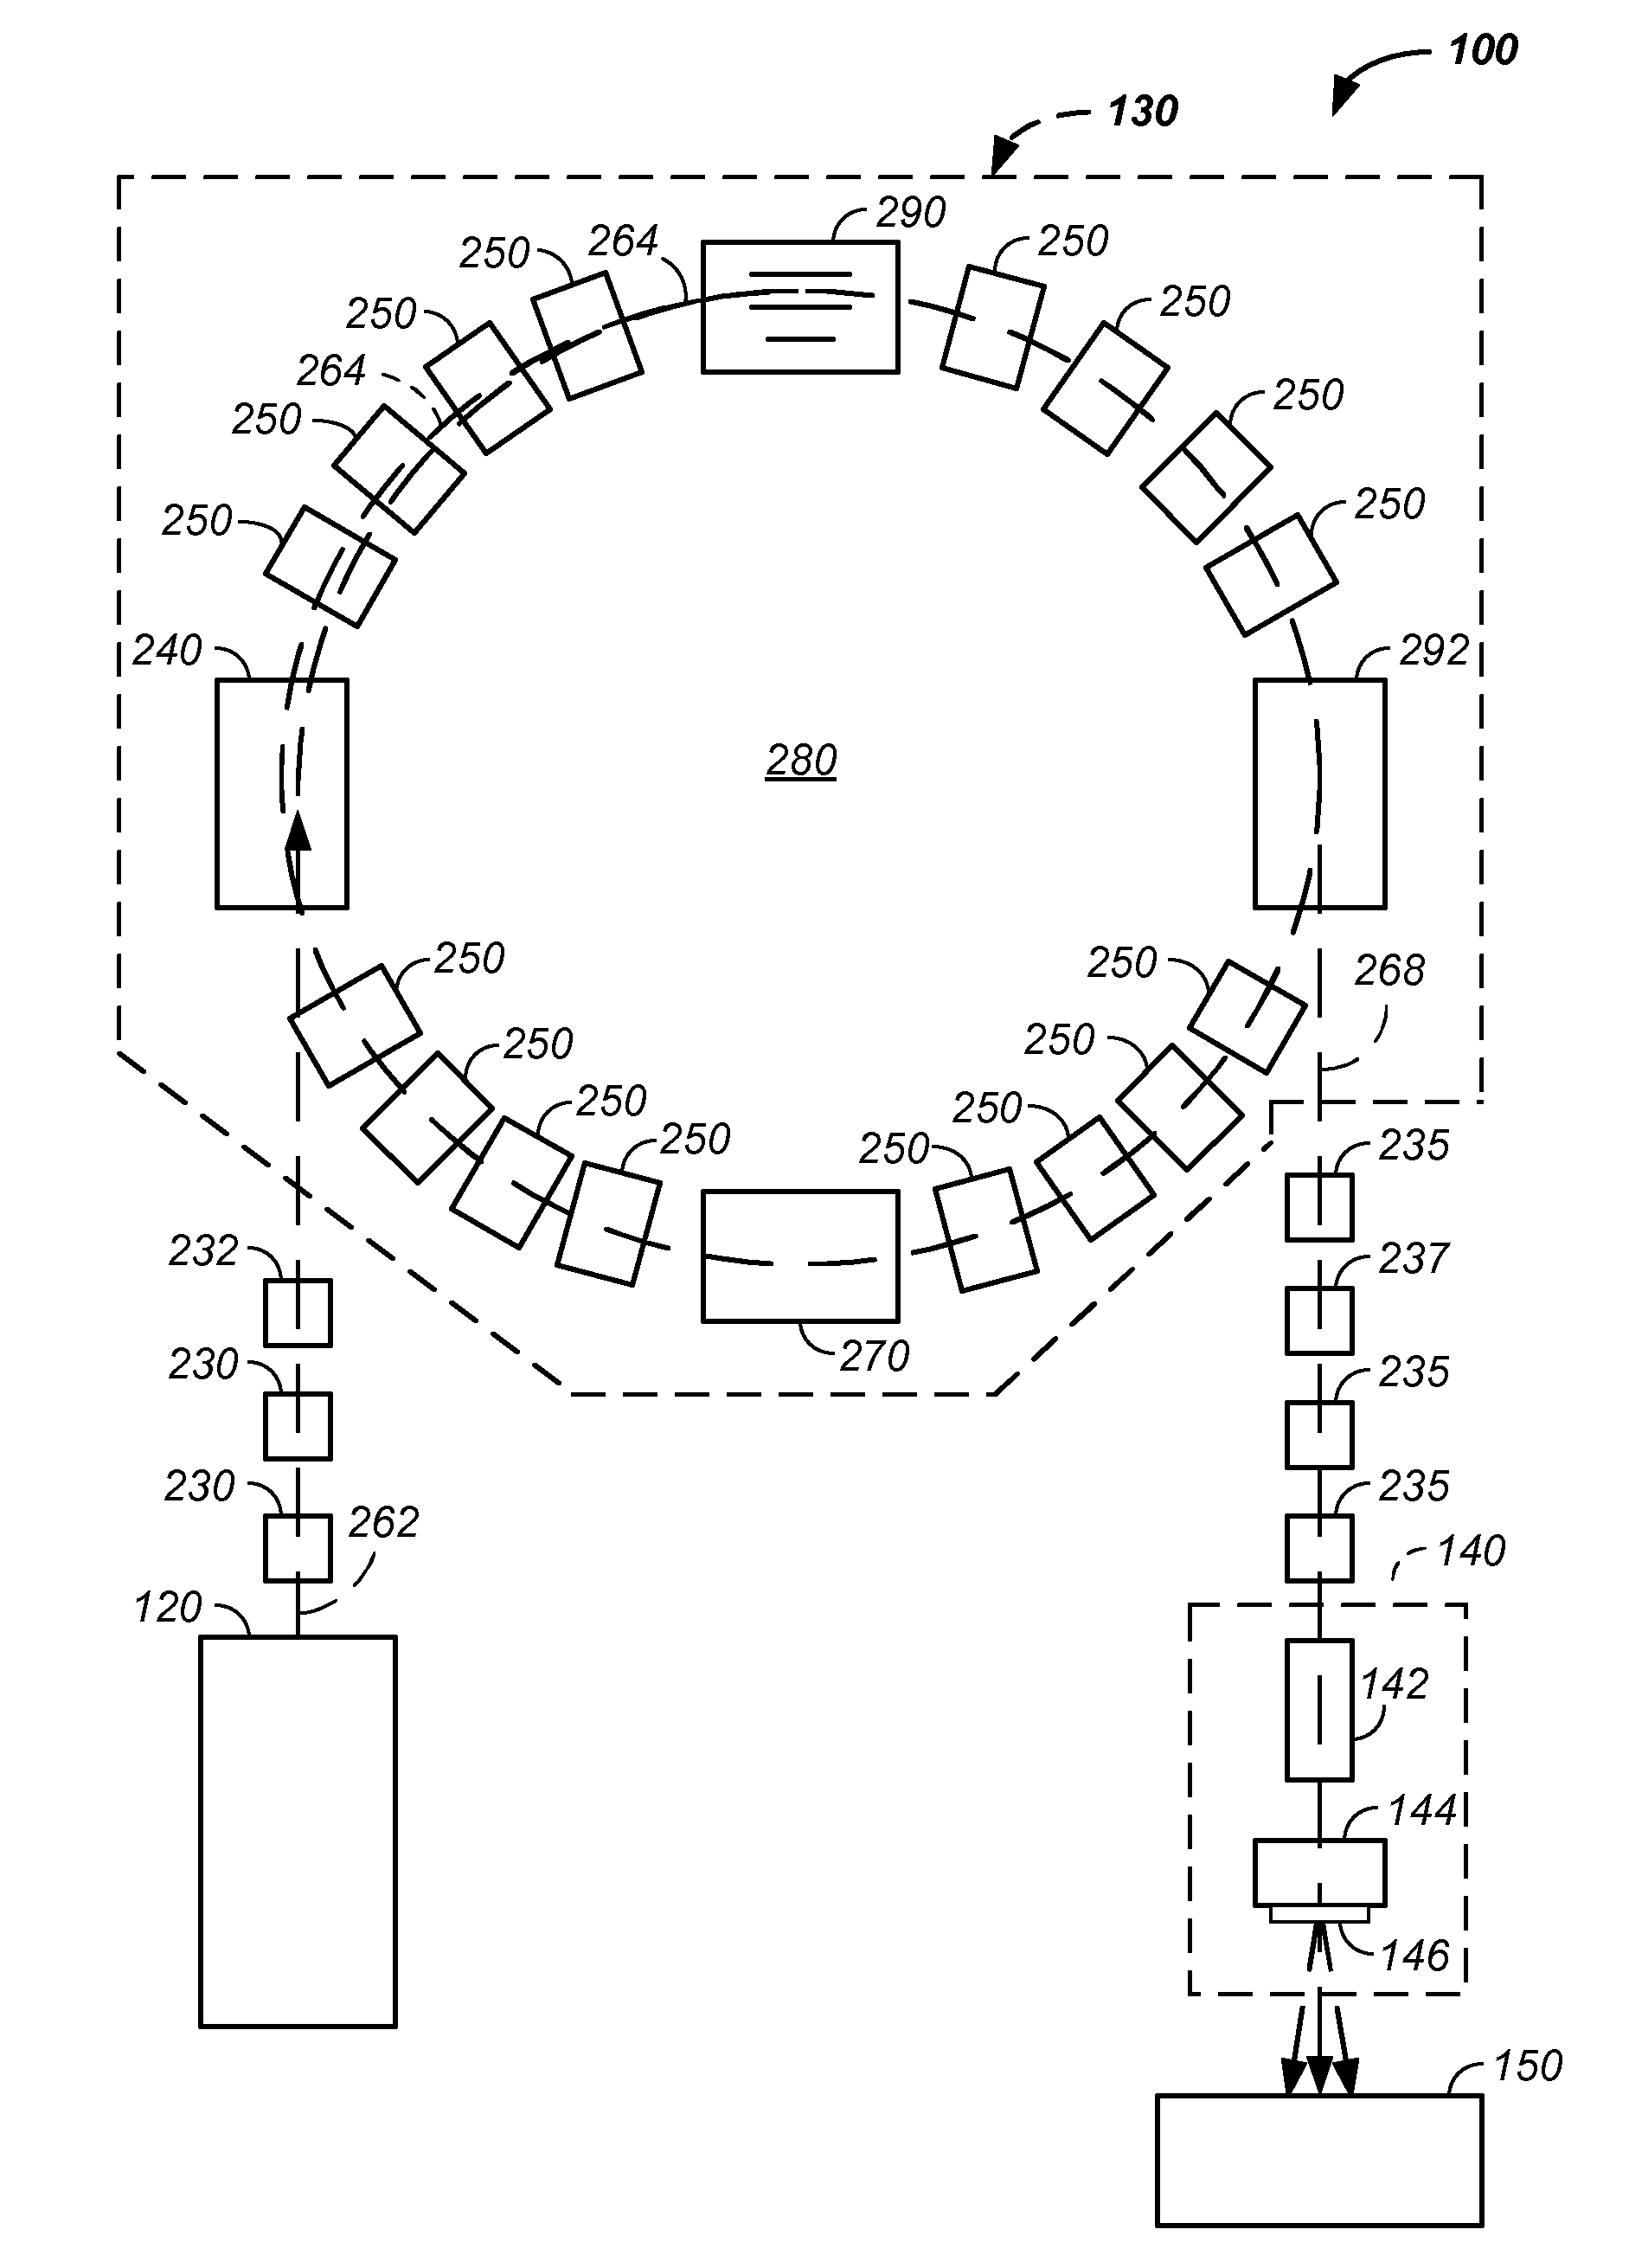 Method and apparatus coordinating synchrotron acceleration periods with patient respiration periods